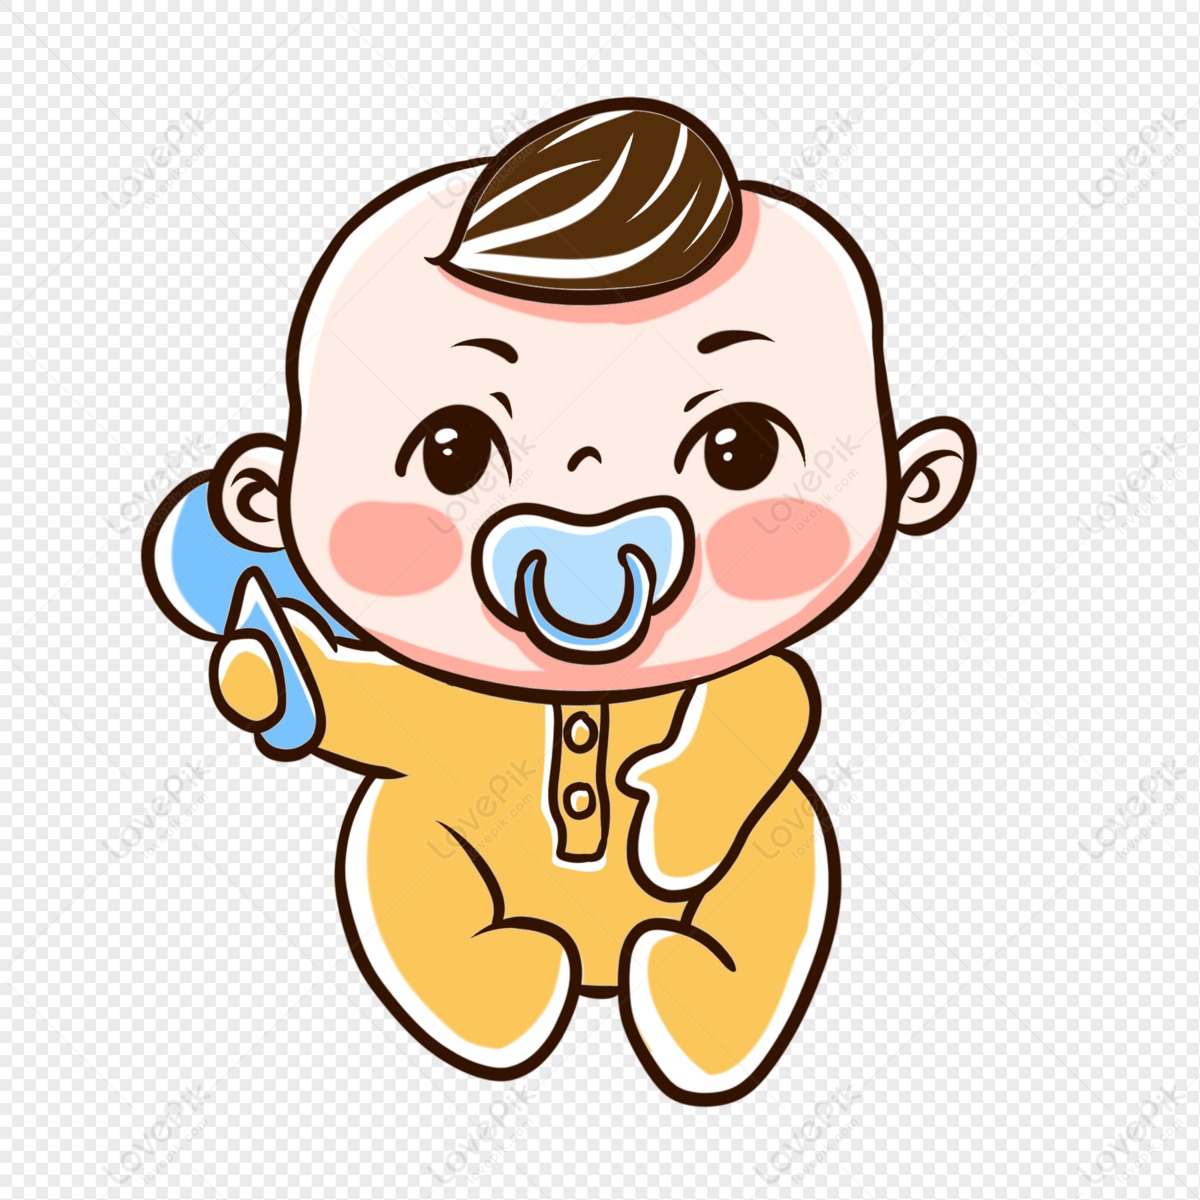 Baby, Baby, Baby, Toddler PNG Image Free Download And Clipart Image For ...